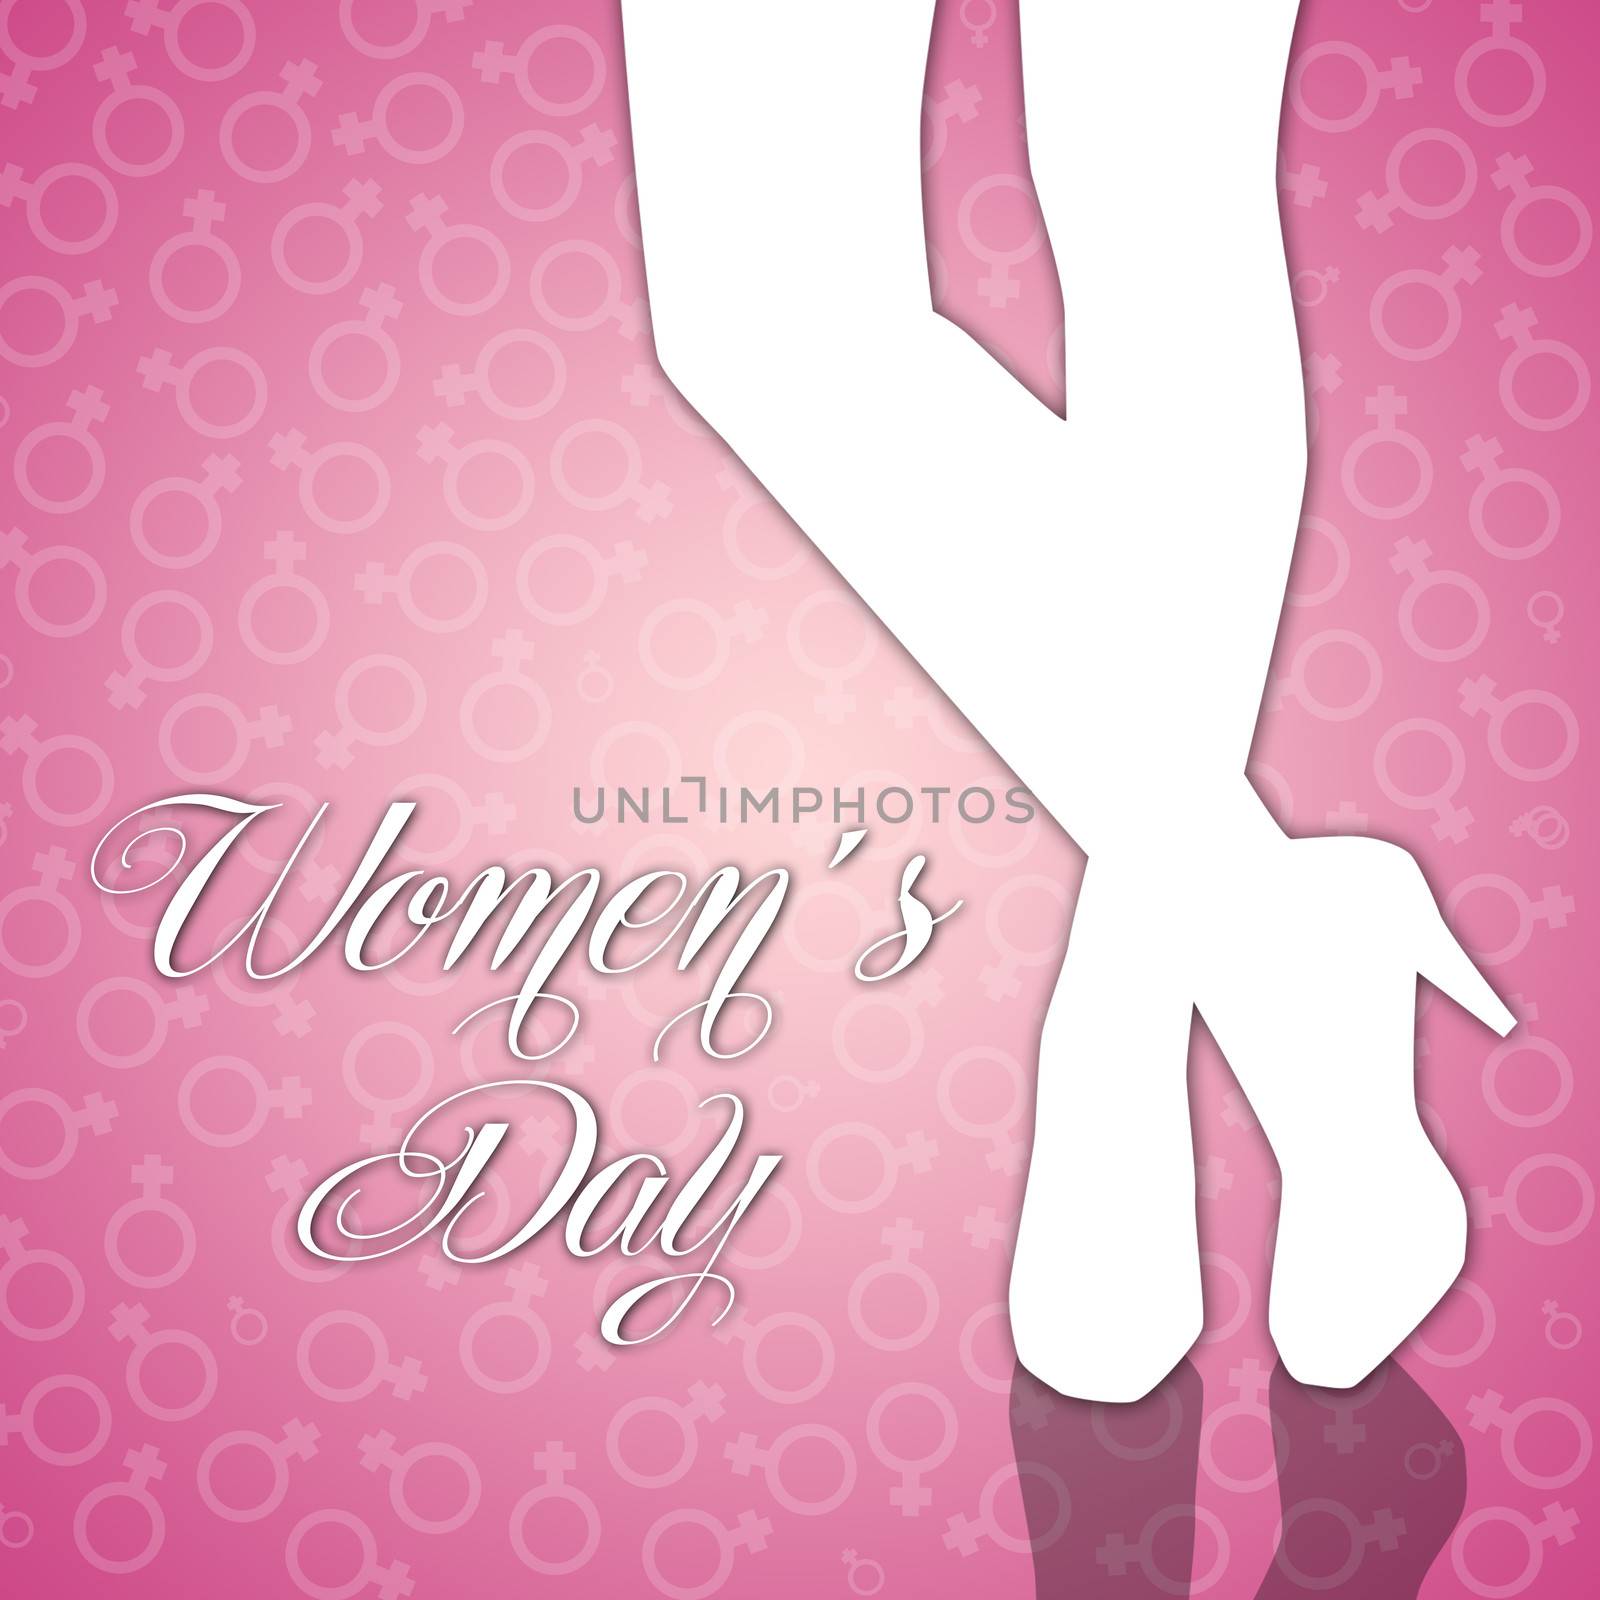 Illustration of Women's Day with woman silhouette